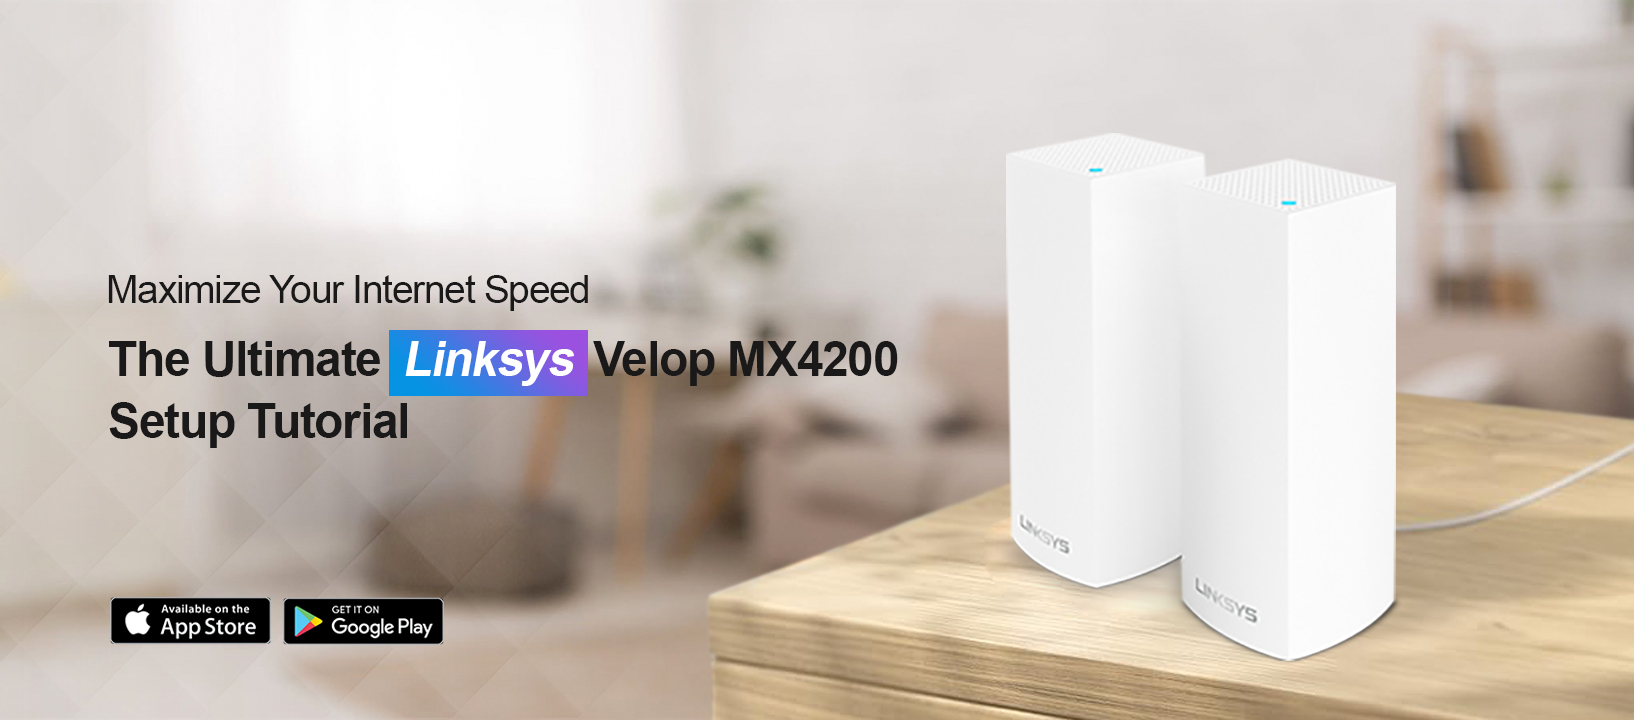 How to Proceed with the Linksys Velop MX4200 Setup